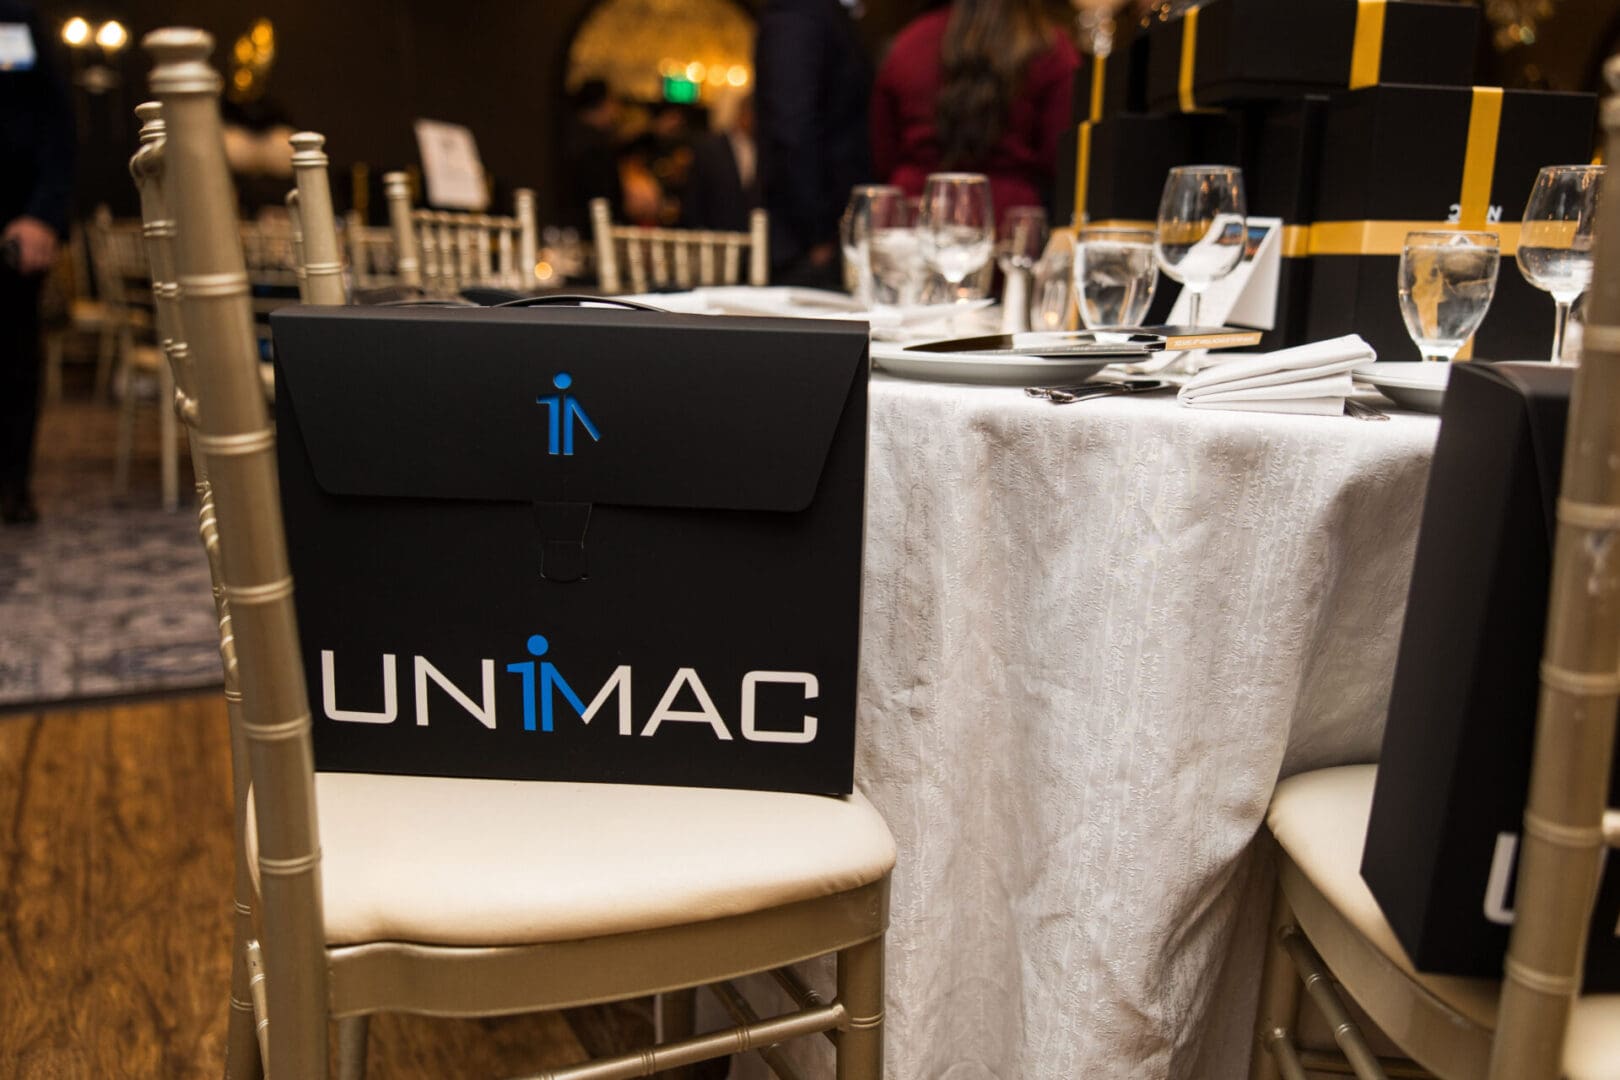 A table with a black and gold unmag logo on it.